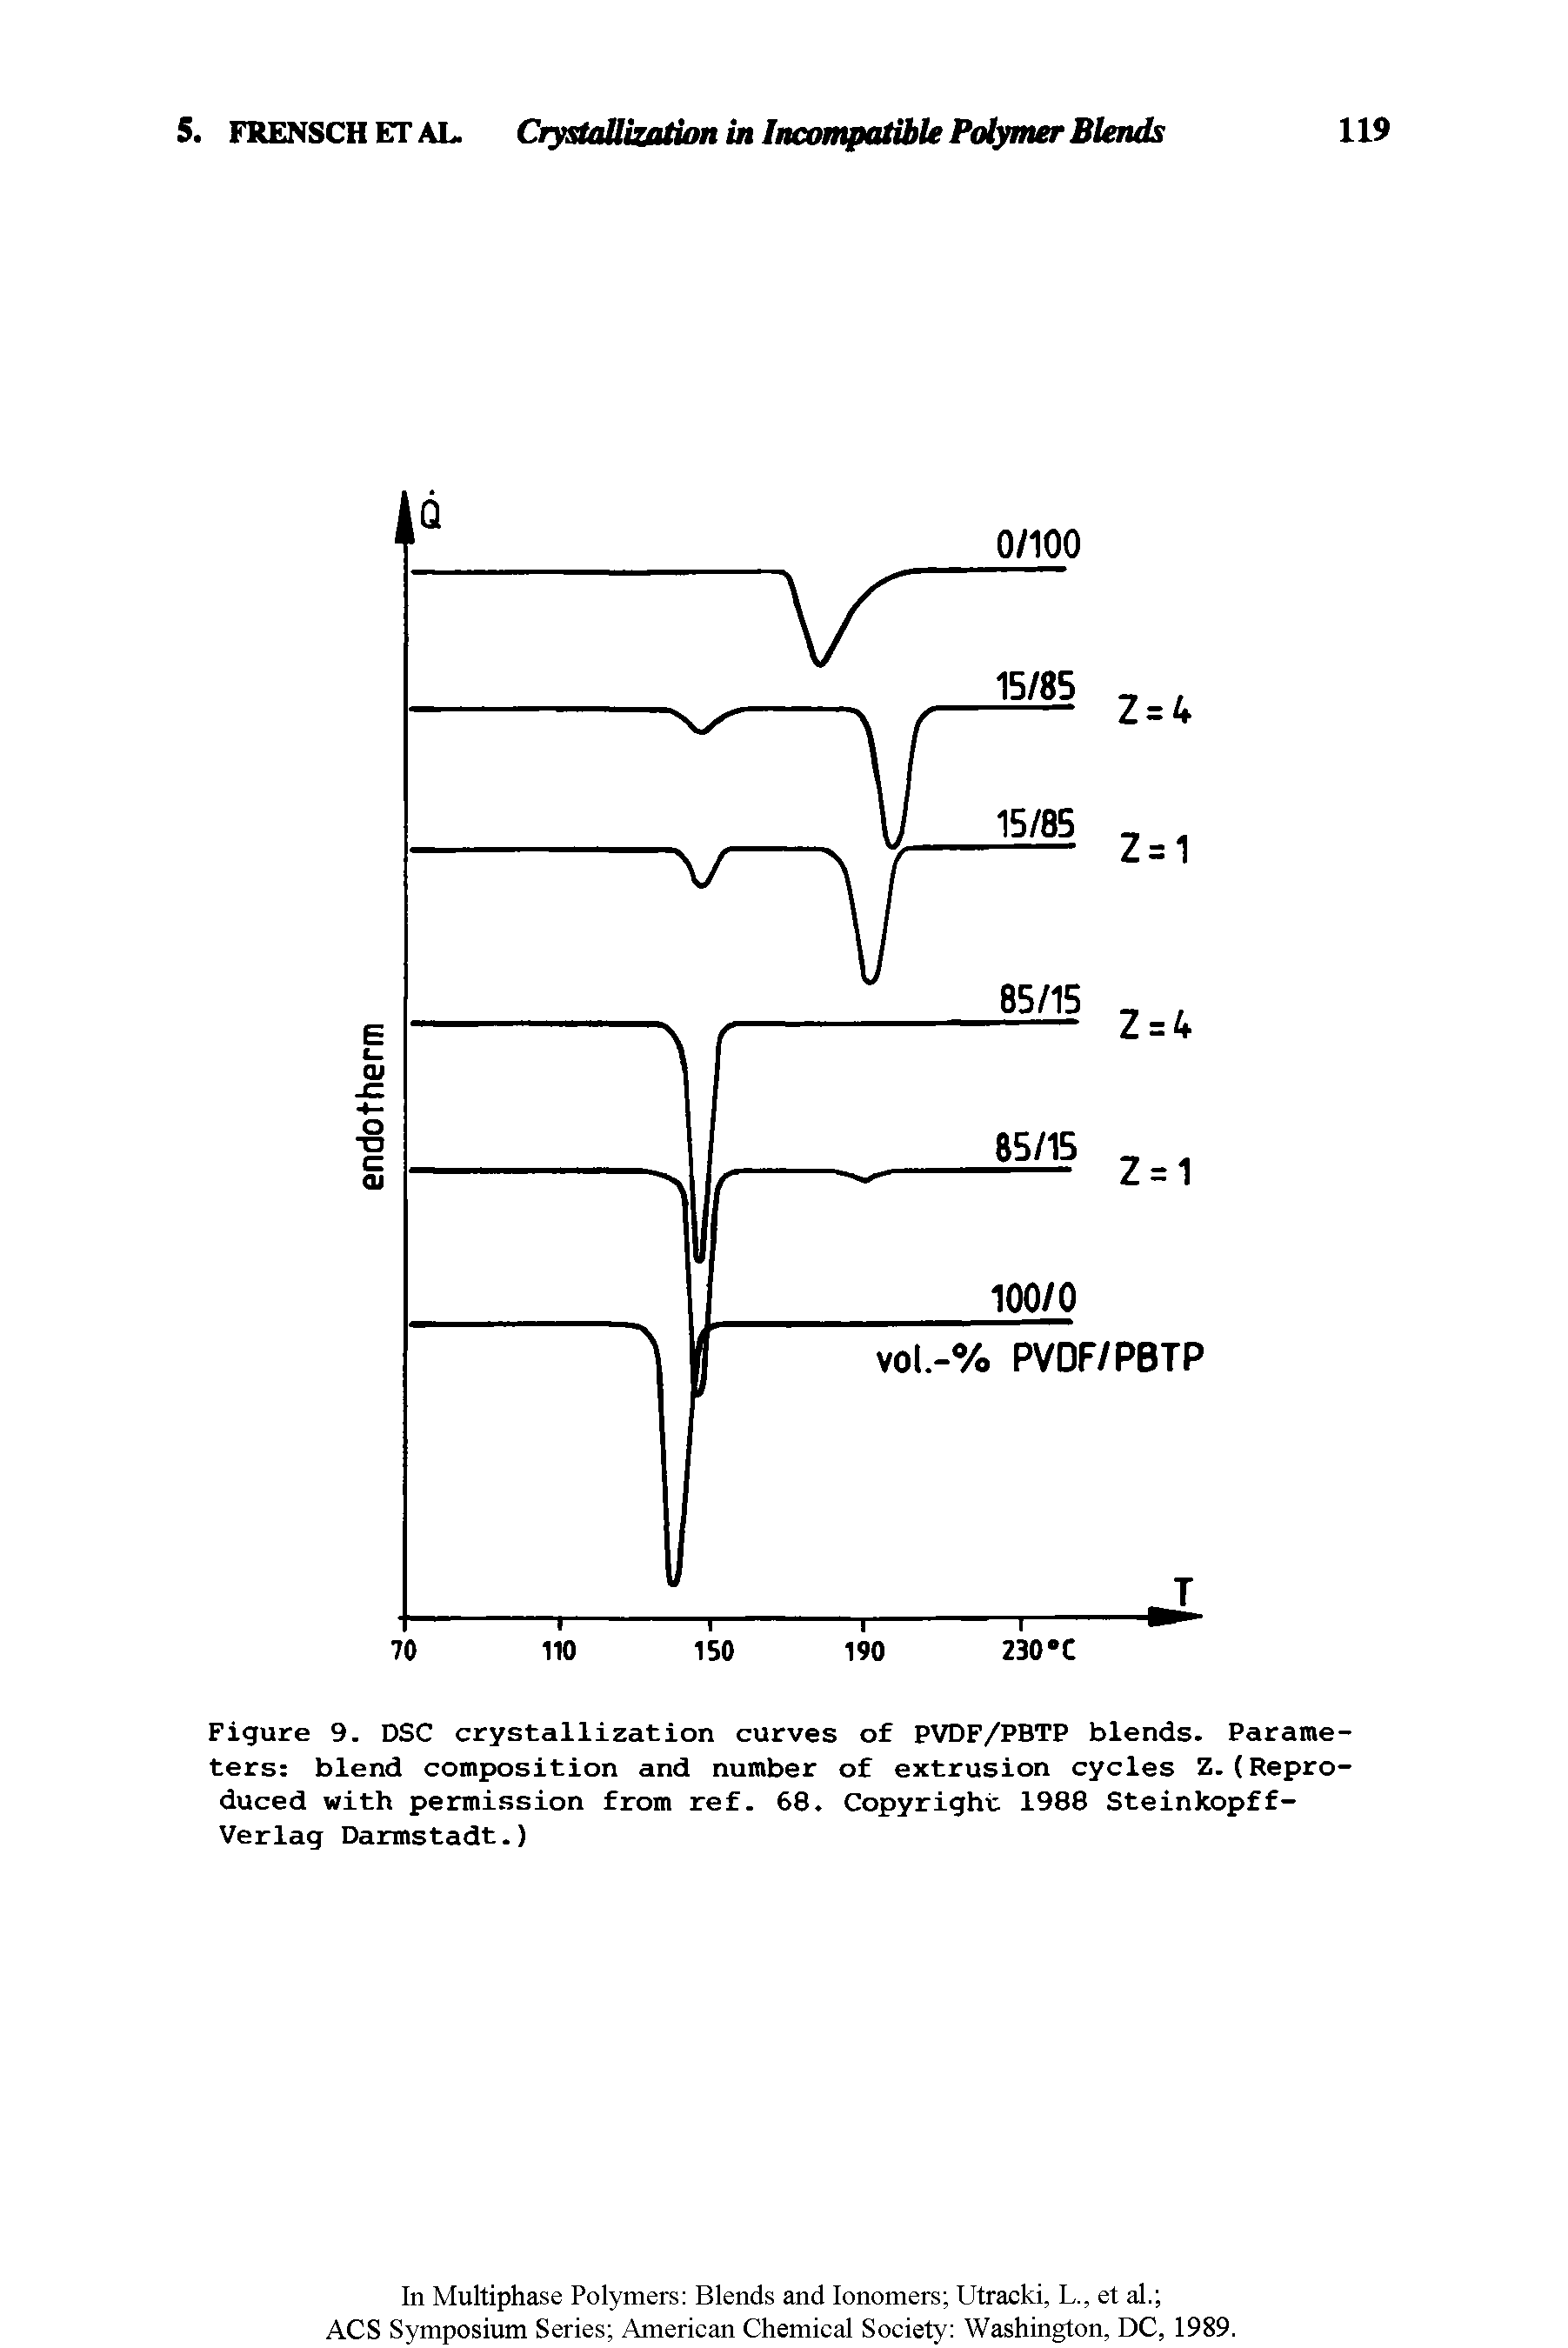 Figure 9. DSC crystallization curves of PVDF/PBTP blends. Parameters blend composition and number of extrusion cycles Z.(Reproduced with permission from ref. 68. Copyright 1988 Steinkopff-Verlag Darmstadt.)...